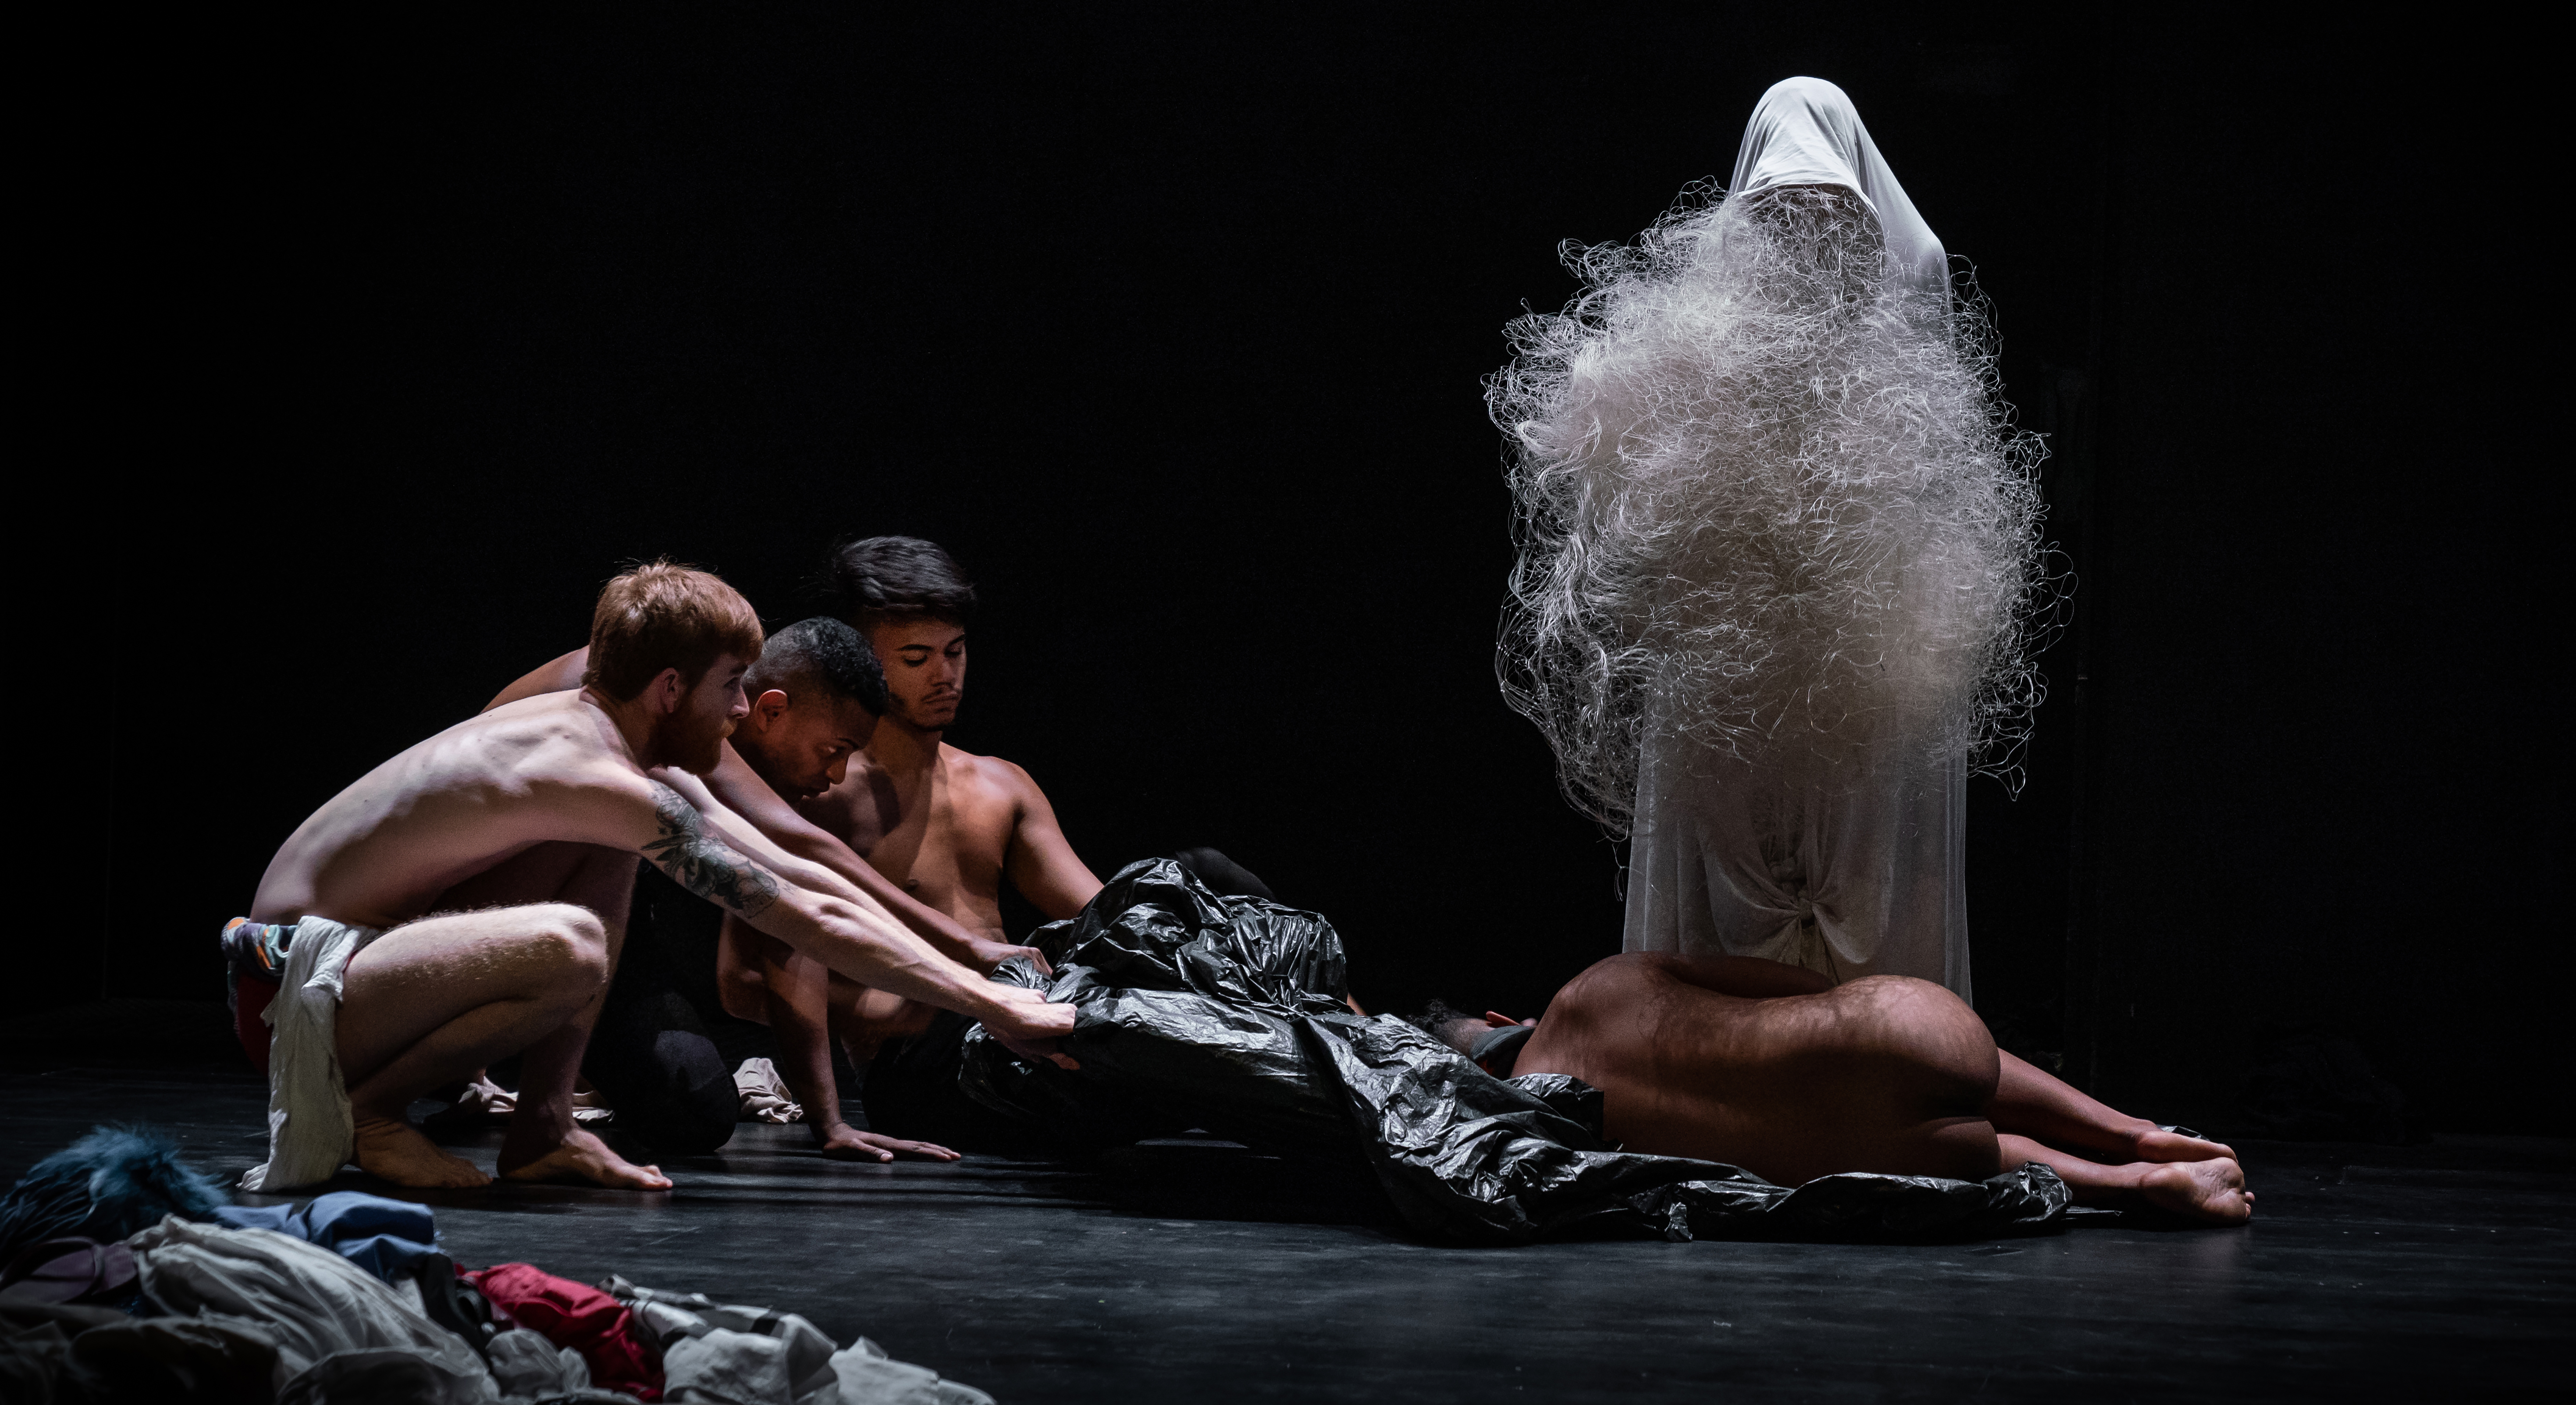 Three shirtless performers pull a large black tarp, on which a nude person is lying in a cradle position. An ominous, white-cloaked figure draped in white, hairy wire looks down at them.